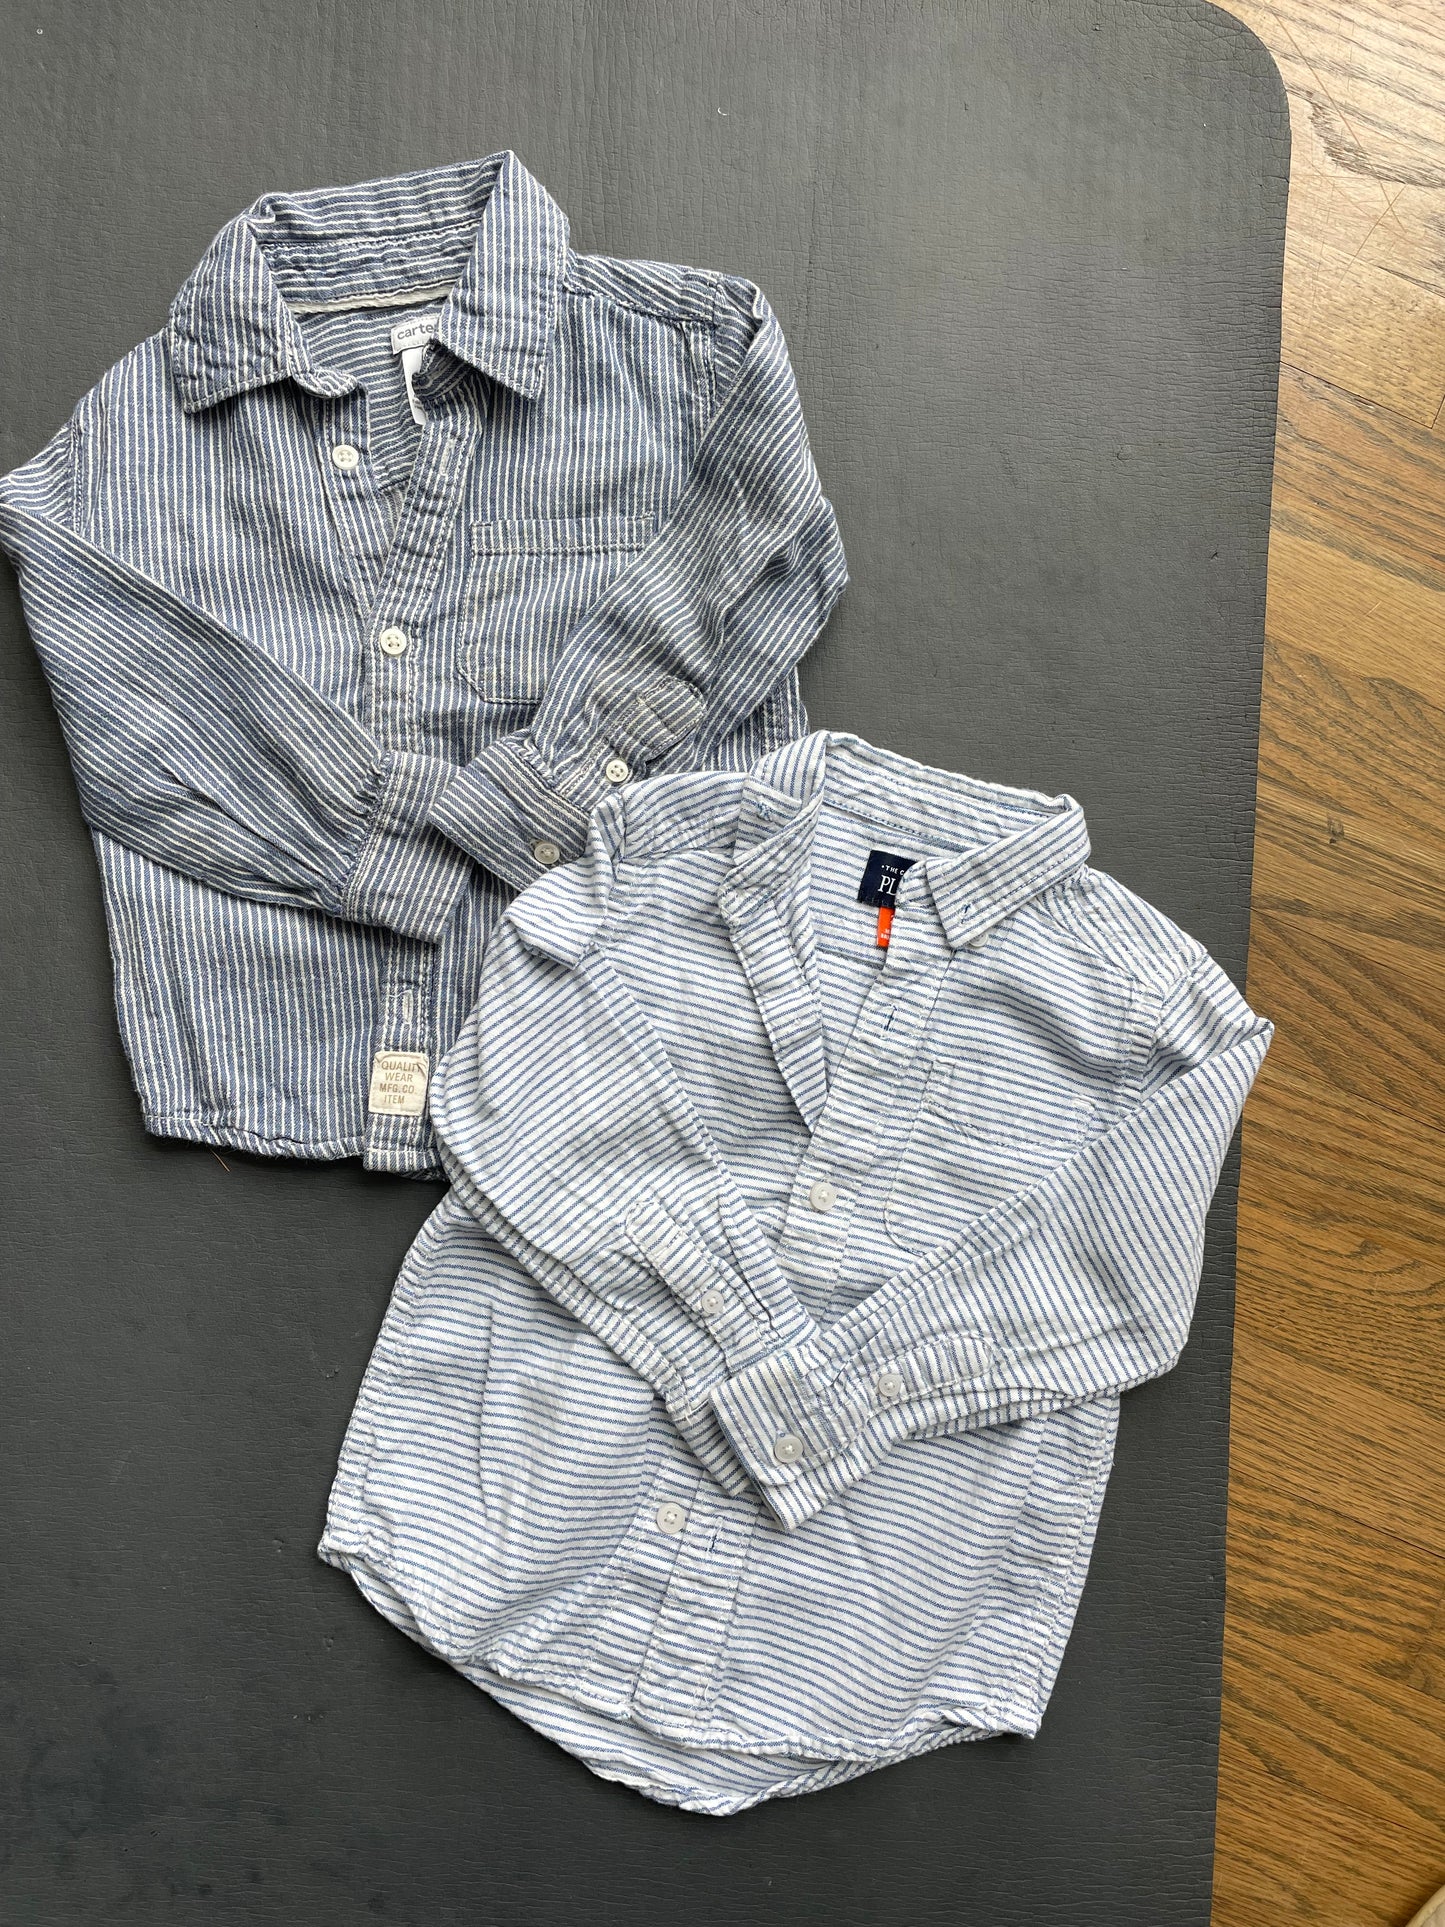 REDUCED Button up shirts toddler 2t